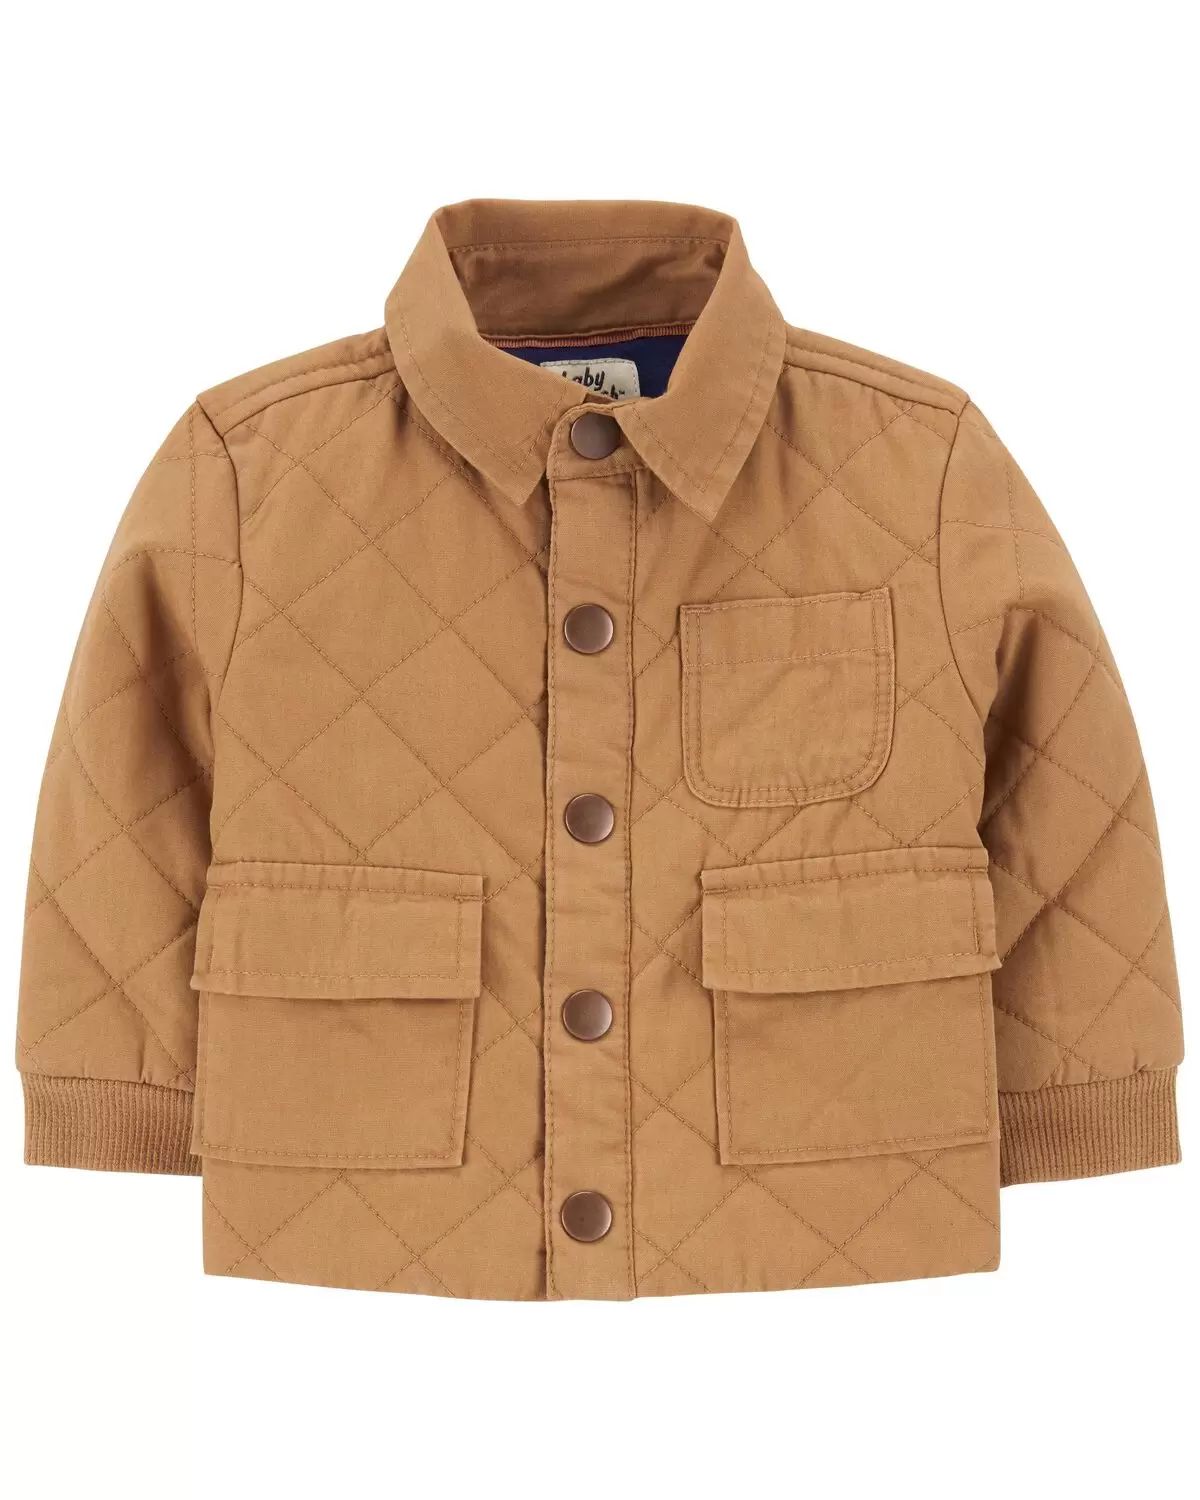 Brown Baby Classic Canvas Barn Jacket | carters.com | Carter's